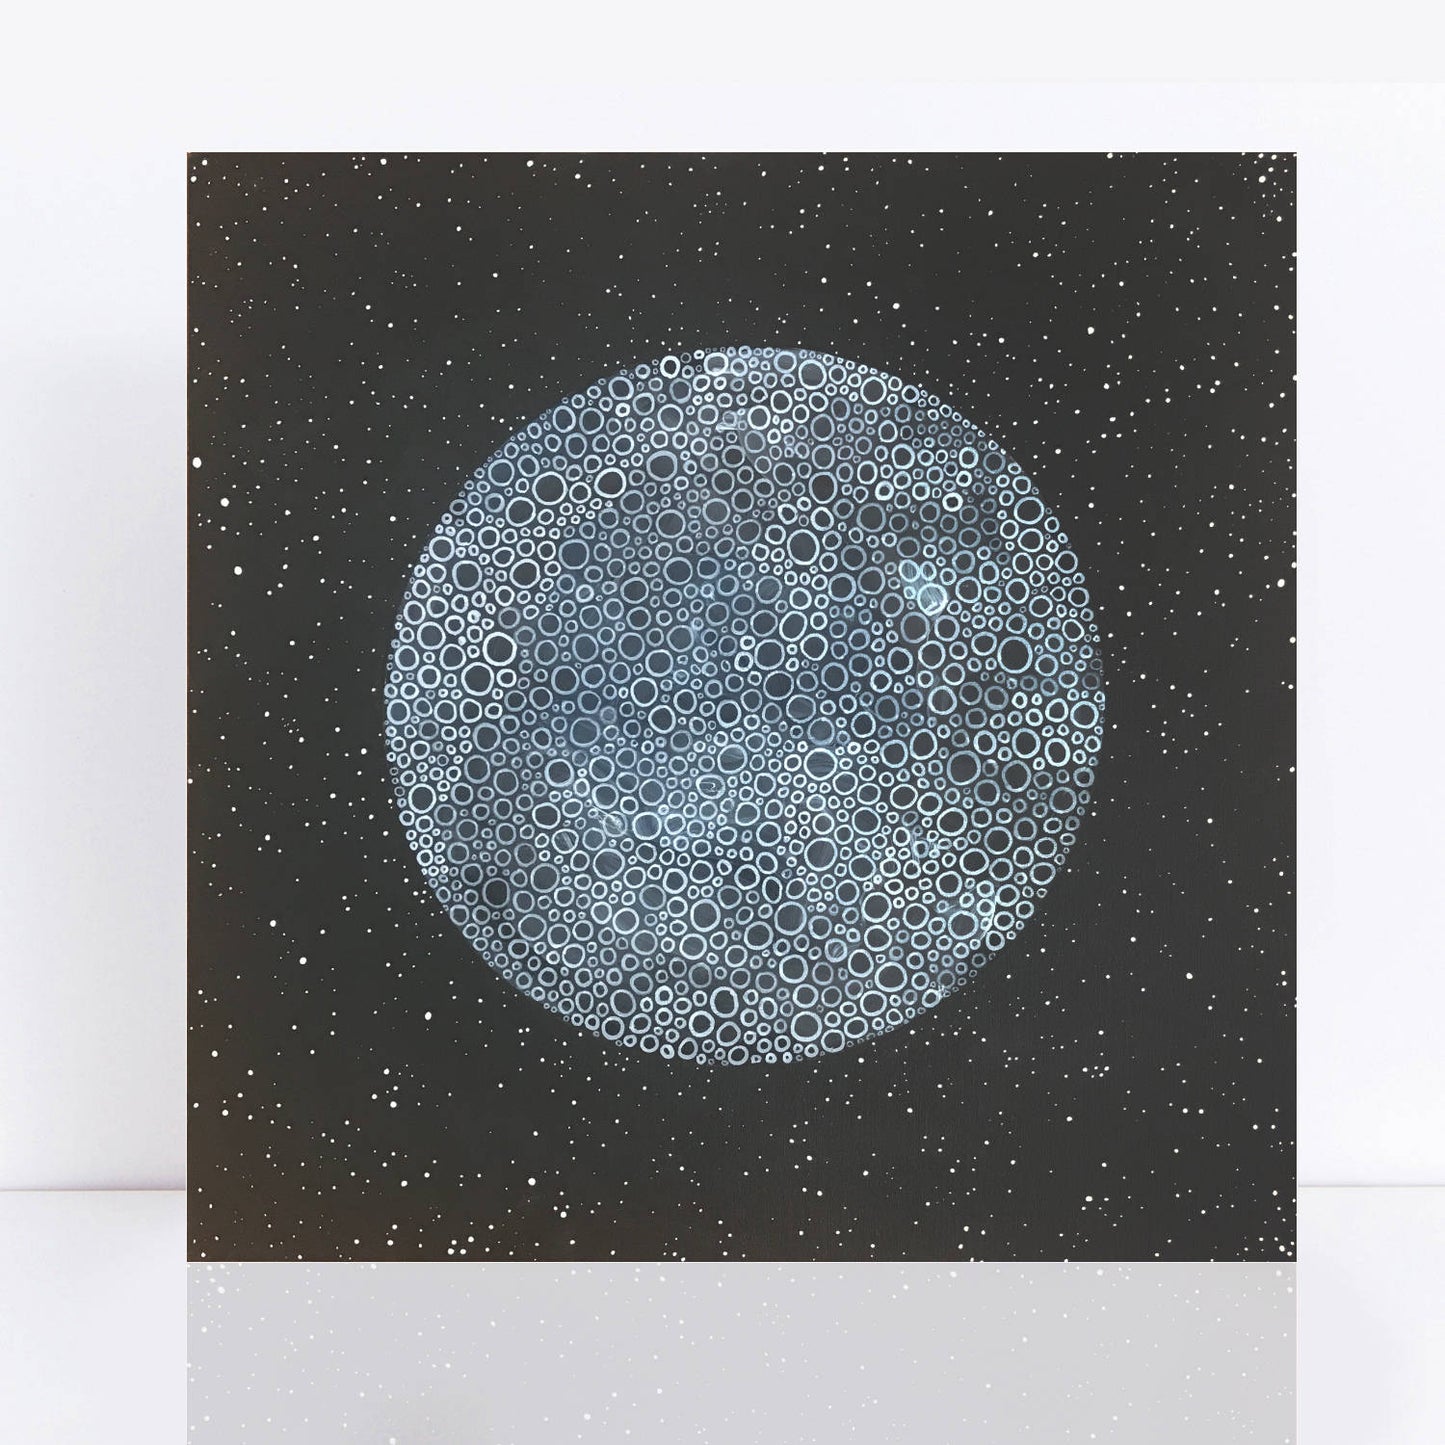  black and white abstract painting of the moon and night sky